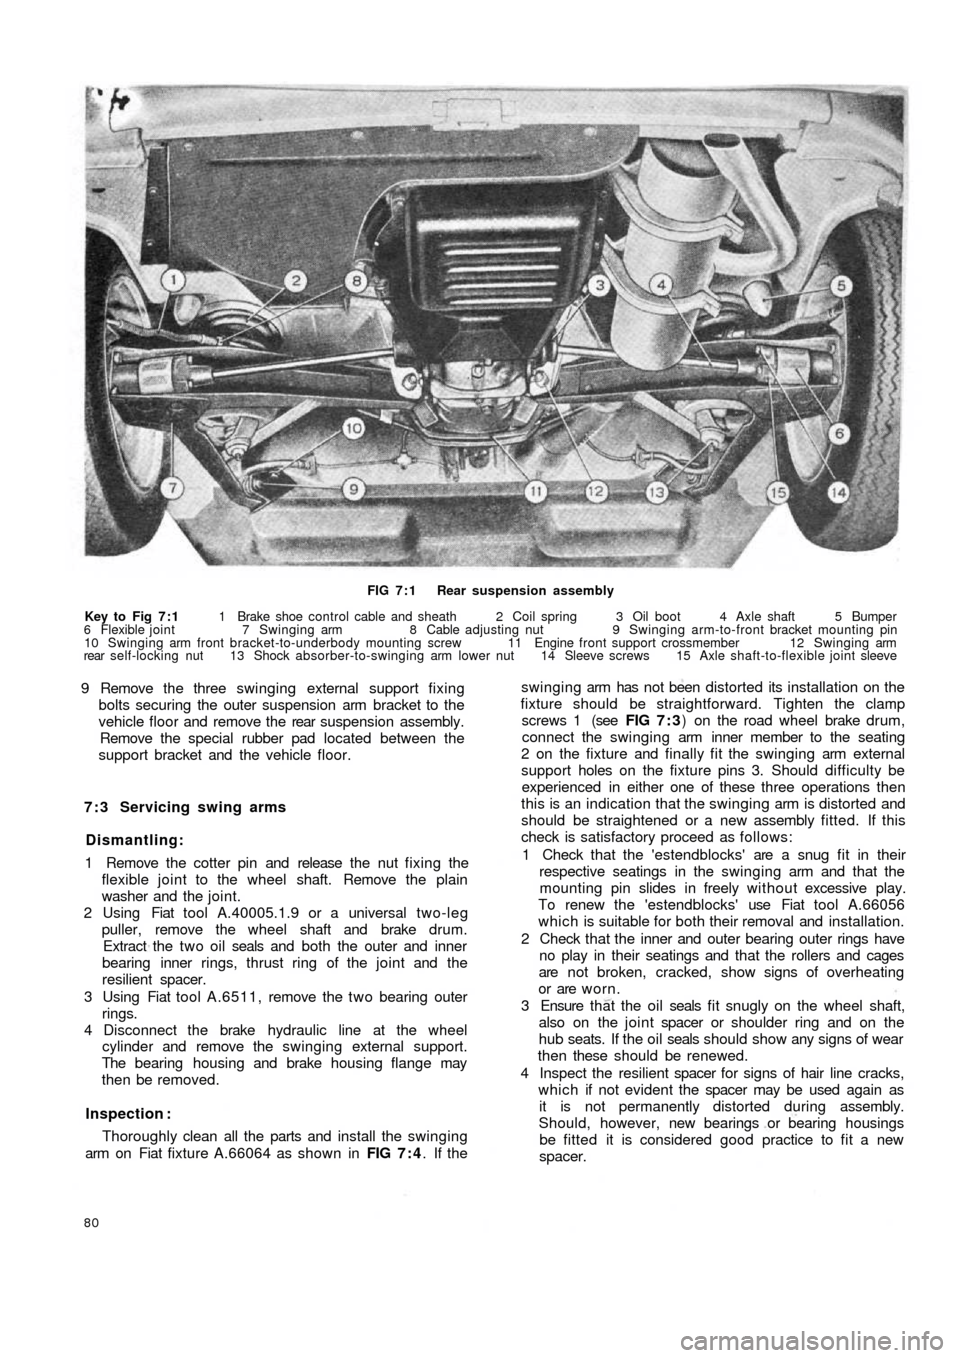 FIAT 500 1963 1.G Workshop Manual FIG 7 : 1  Rear suspension assembly
Key to Fig 7 : 1 1 Brake shoe control cable and sheath  2 Coil spring  3  Oil  boot  4  Axle shaft 5 Bumper
6 Flexible joint 7 Swinging arm 8 Cable adjusting nut  9